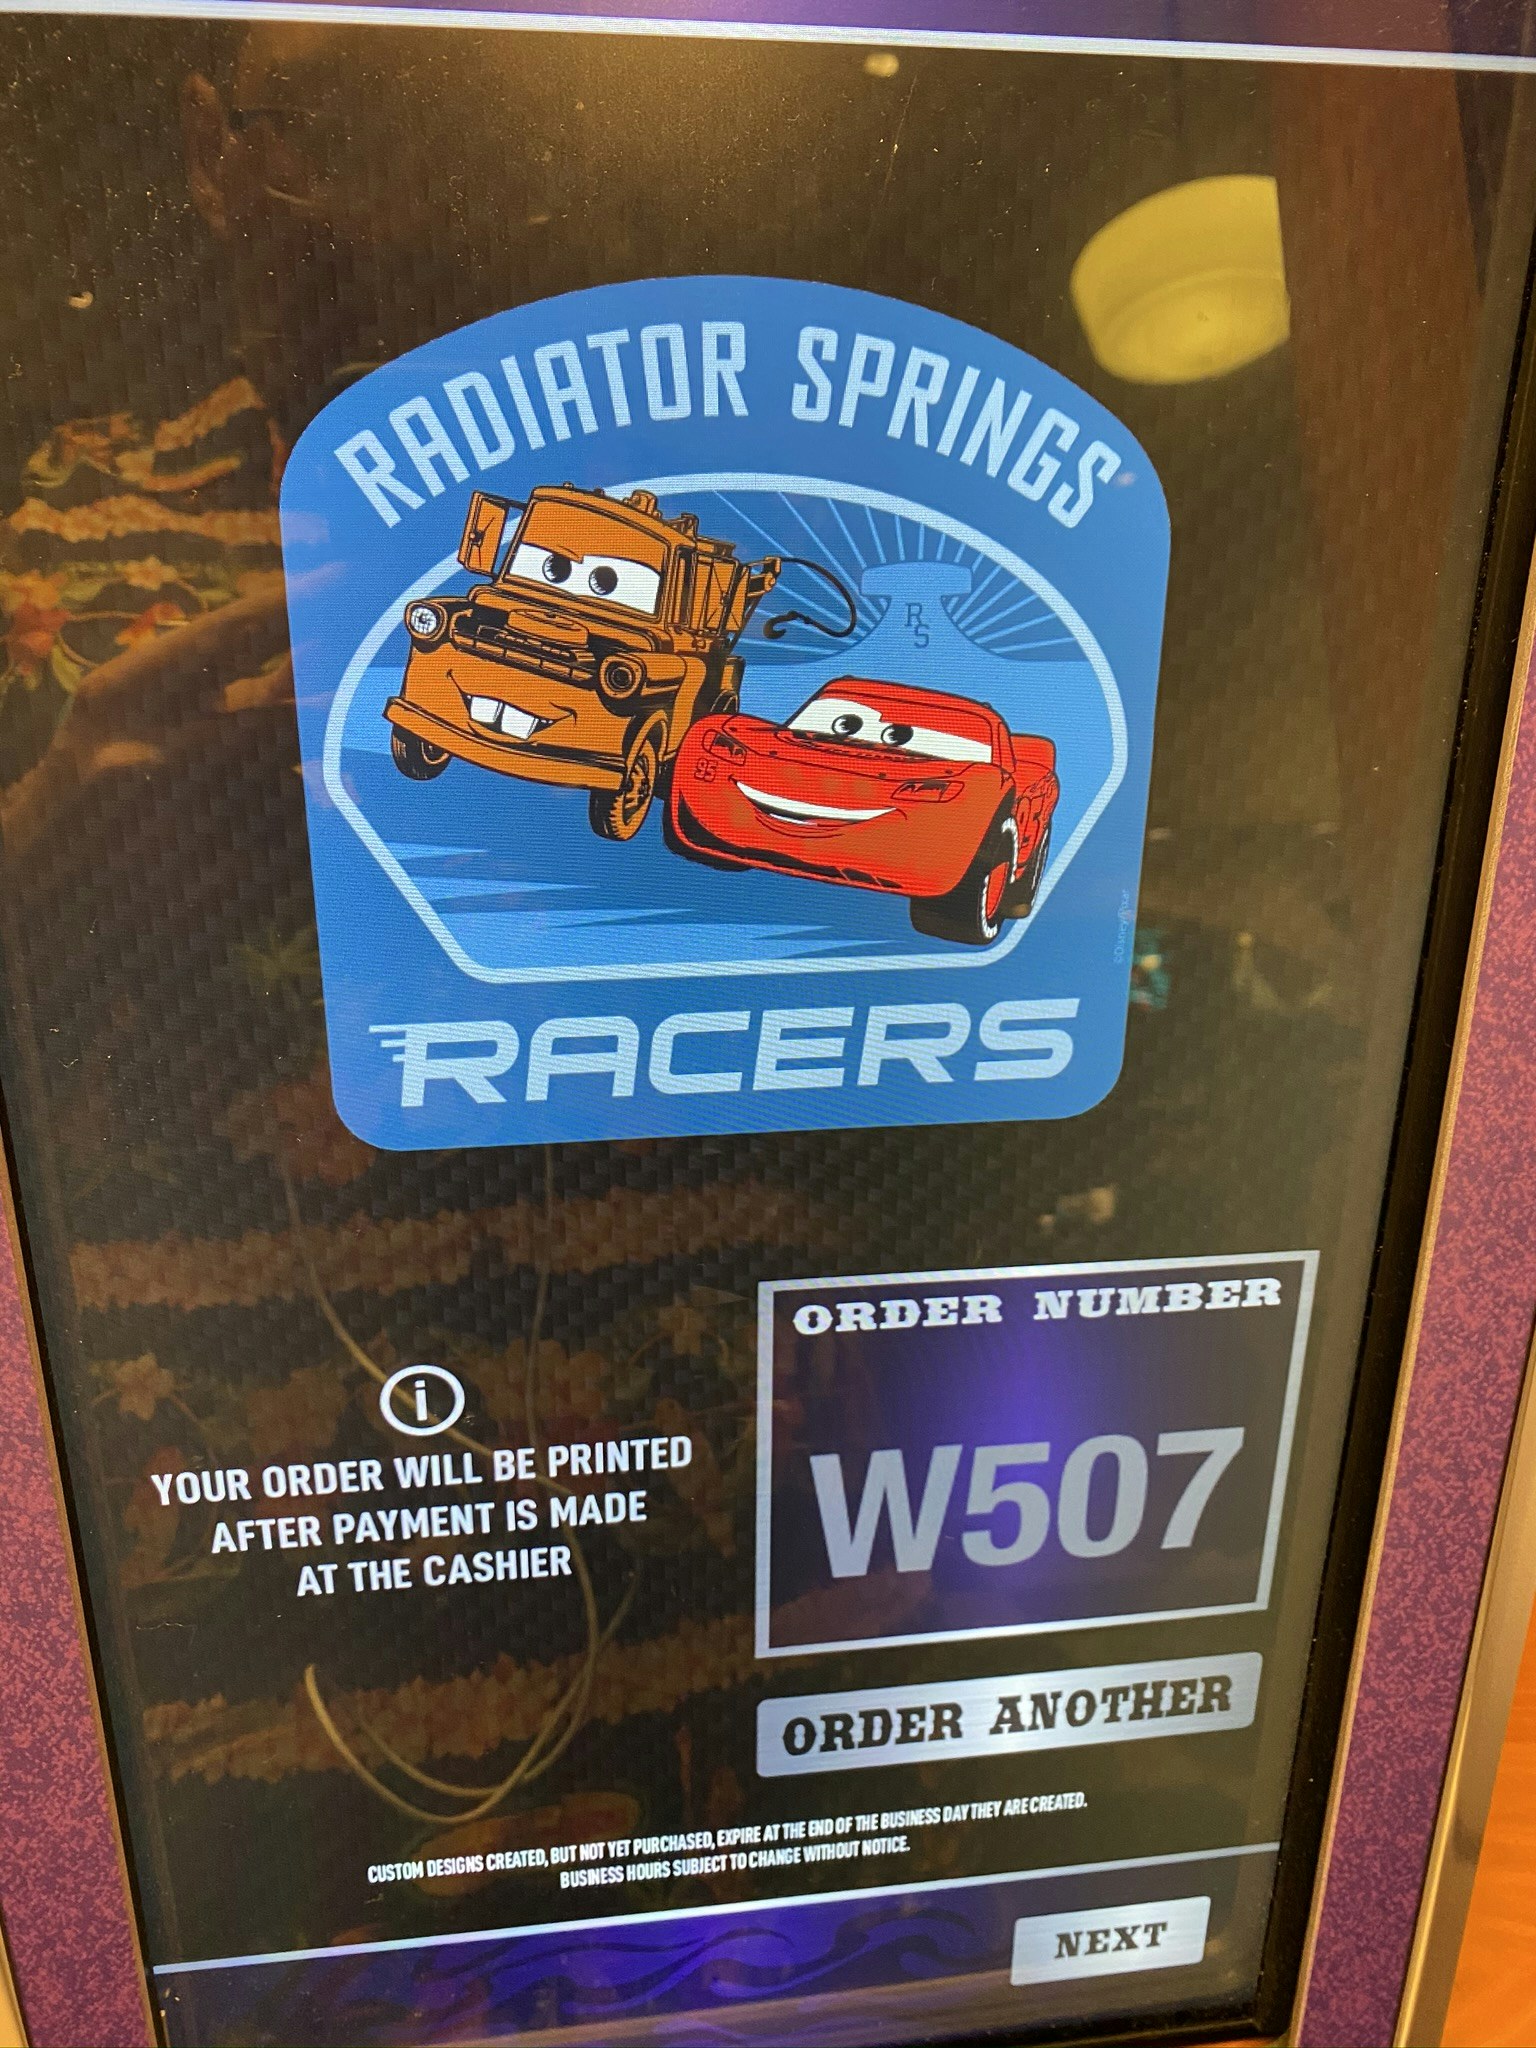 https://wdwnt.com/2020/02/photos-new-made-by-you-t-shirt-customization-kiosk-debuts-at-disney-springs/